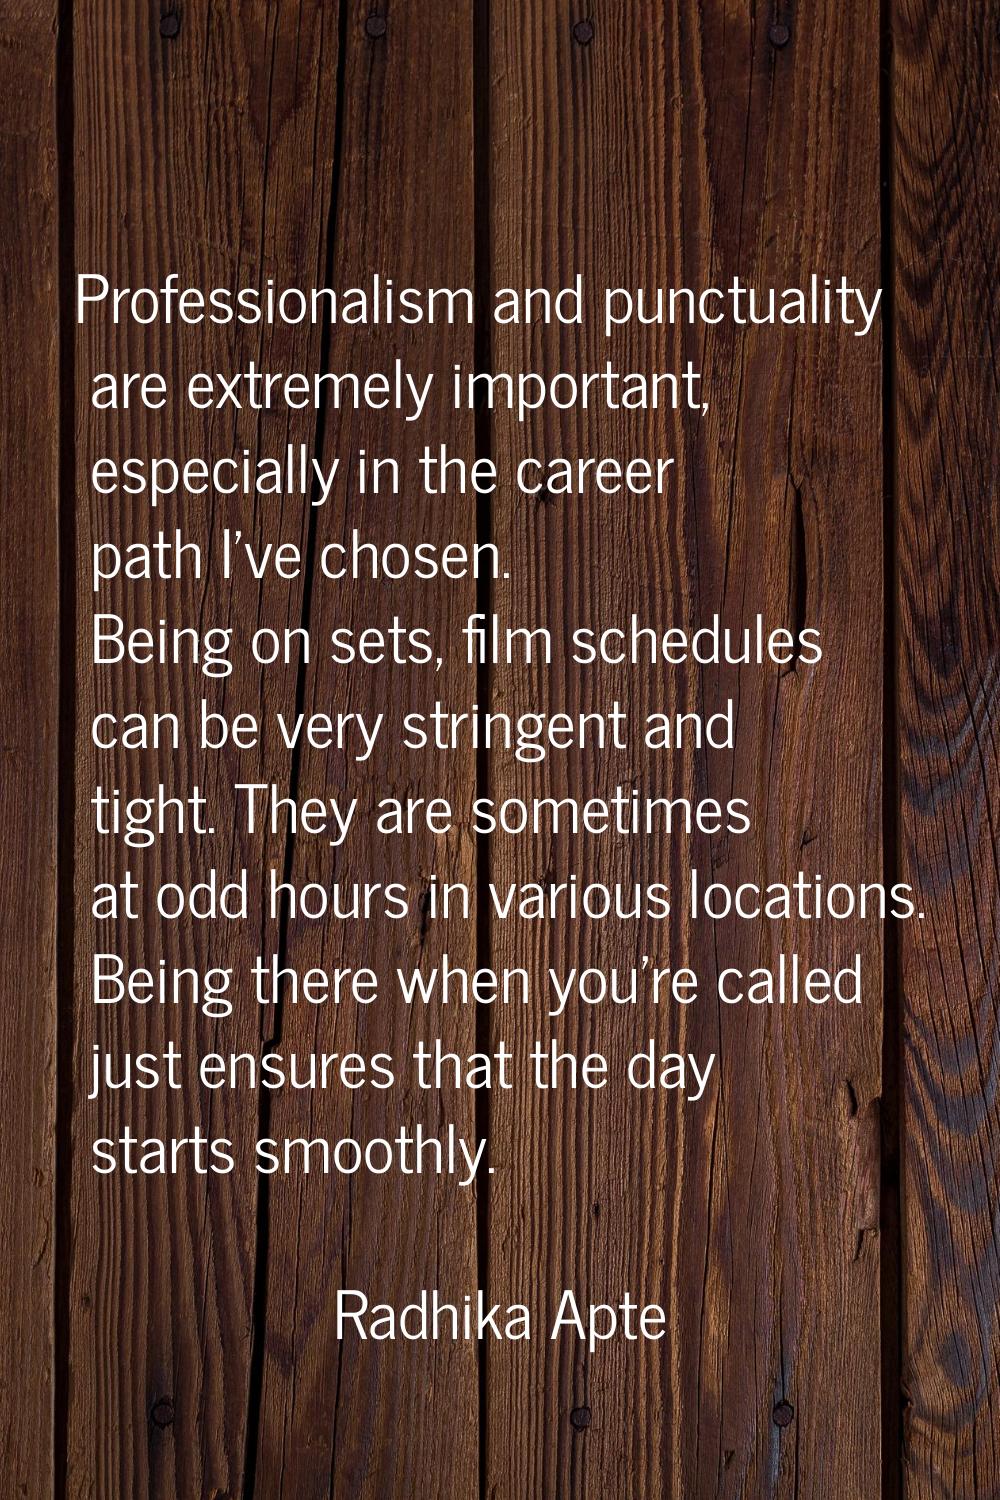 Professionalism and punctuality are extremely important, especially in the career path I've chosen.